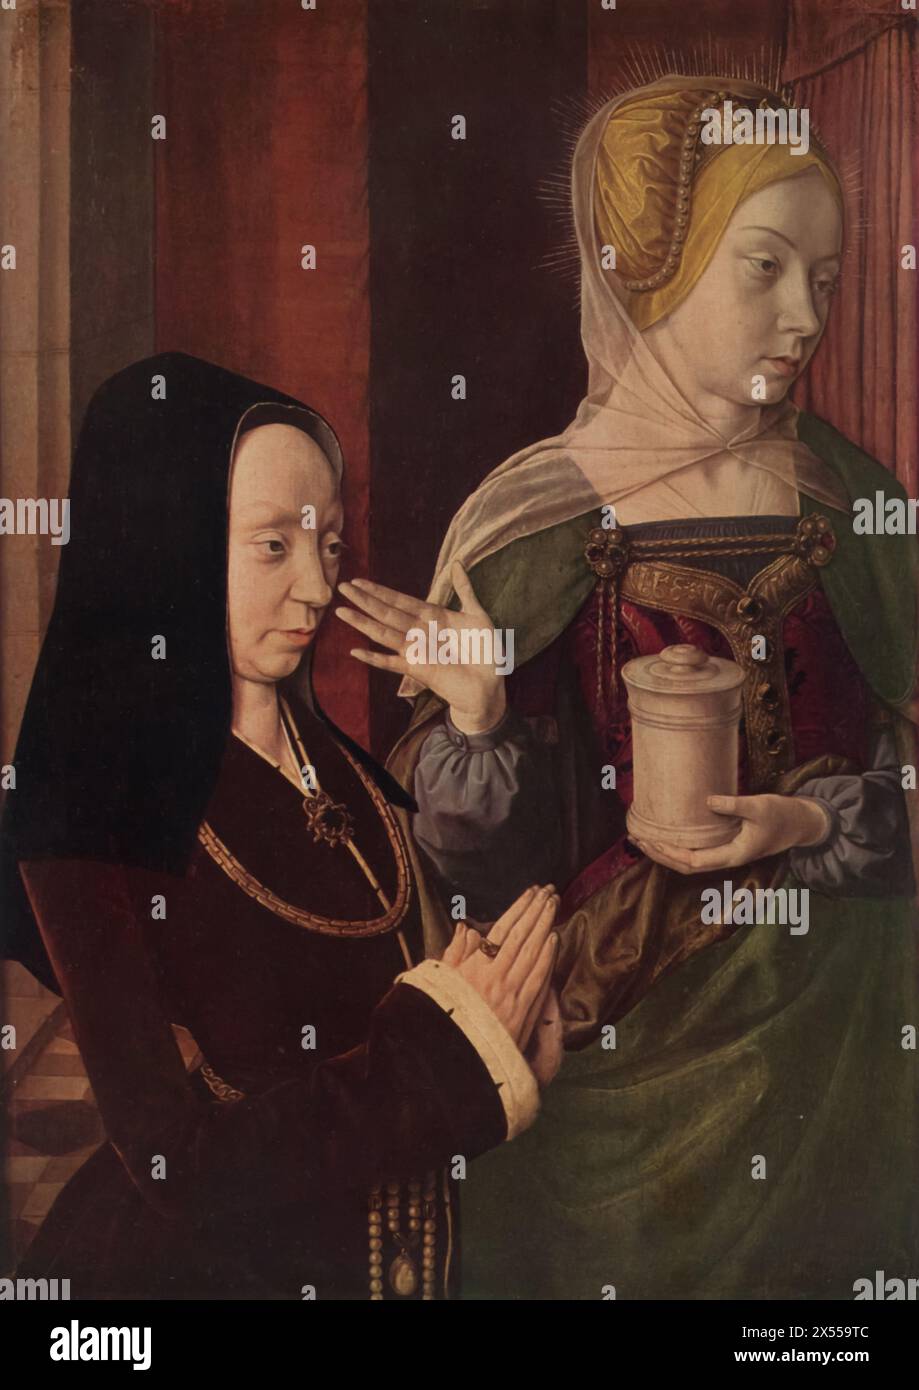 Saint Mary Magdalen and a Donor' by the Master of Moulins, dated 1495, housed at the Louvre Museum, Paris, France. This painting portrays Saint Mary Magdalen, known for her penitent life and role as a follower of Jesus, alongside a wealthy patron. This work showcases the fusion of religious devotion and patronage in late 15th-century art. Stock Photo